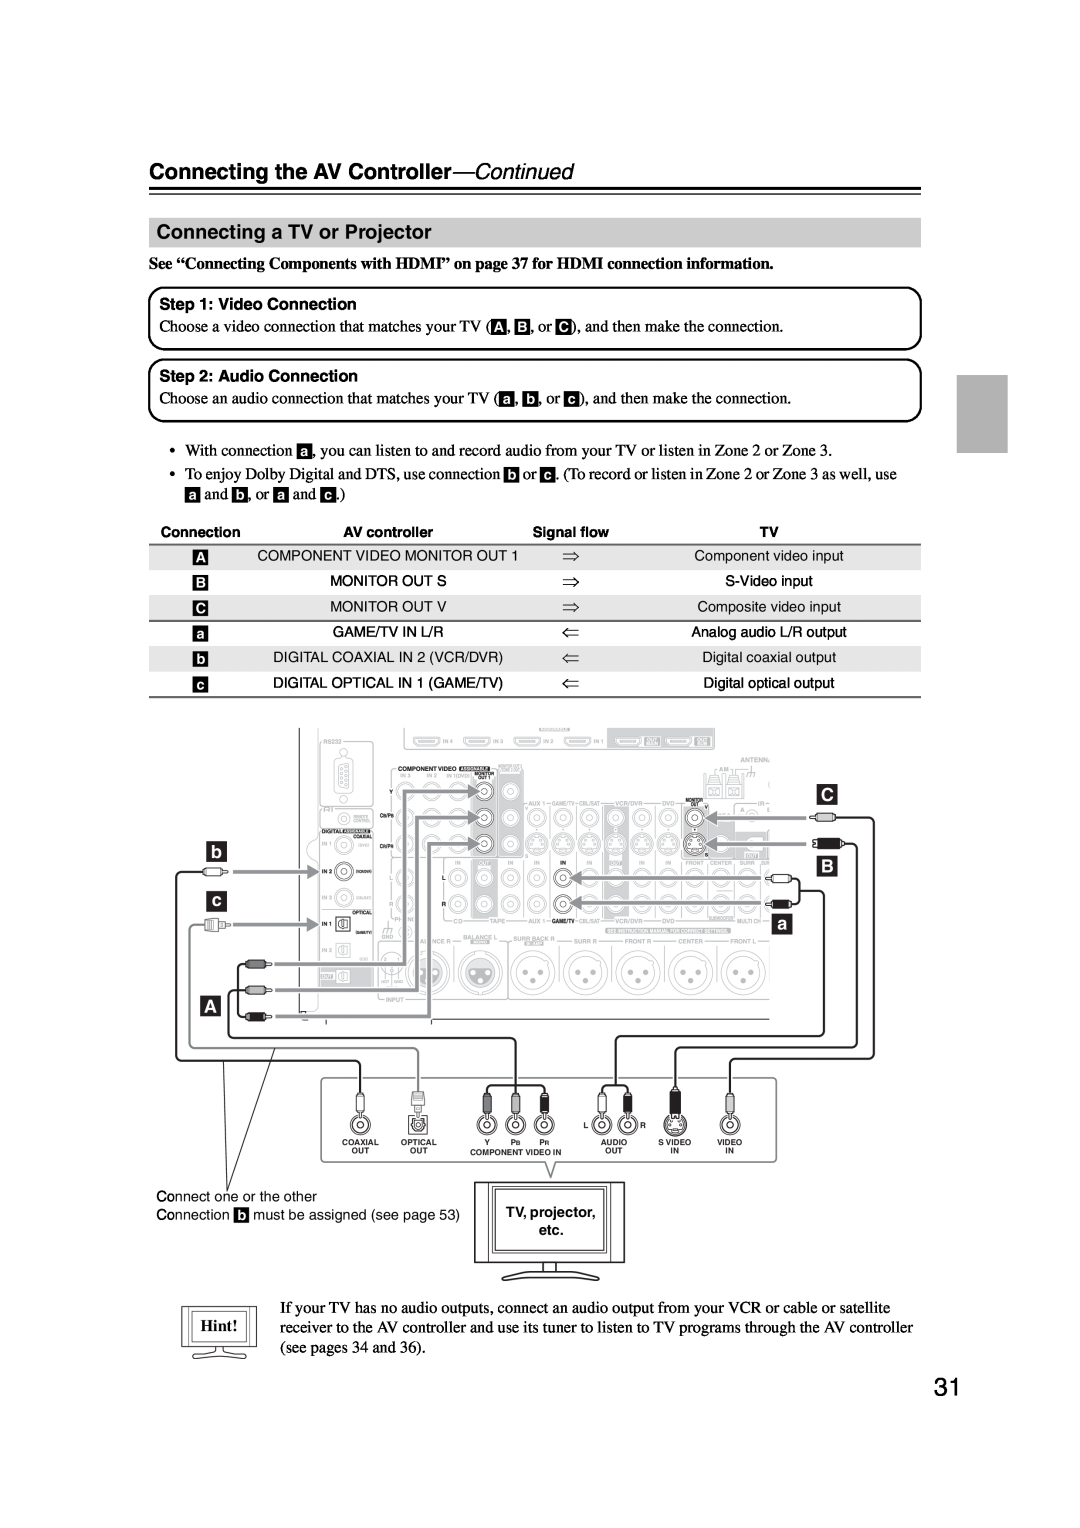 Integra DHC-9.9 instruction manual Connecting a TV or Projector, C B a, Hint, Connecting the AV Controller—Continued 